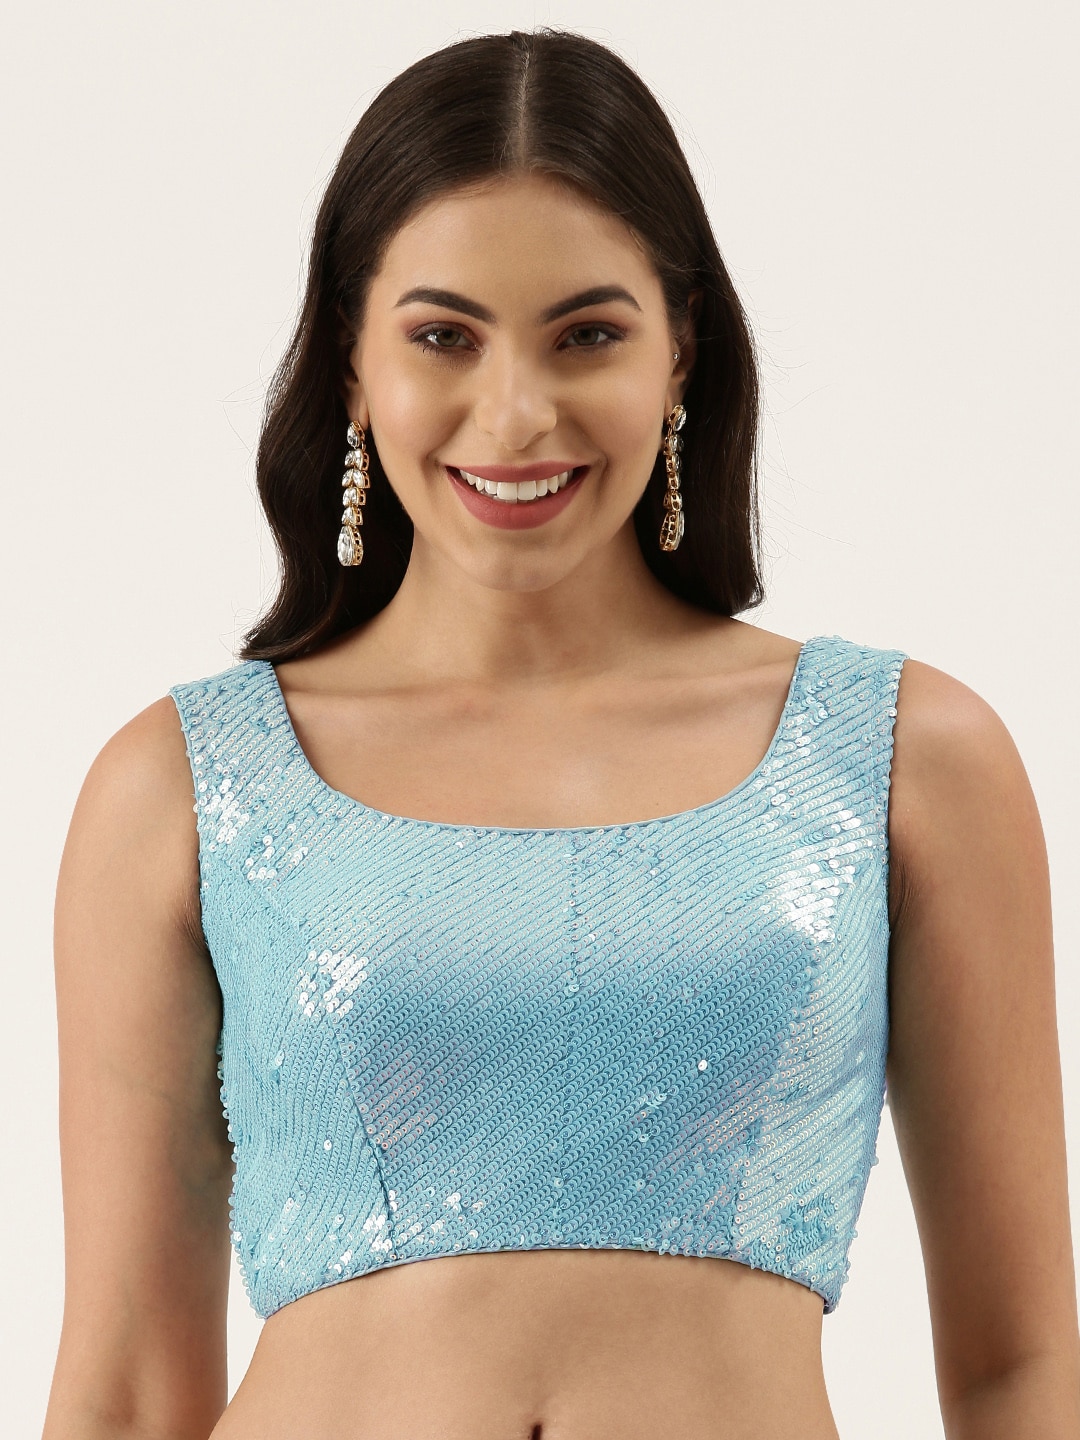 panchhi Turquoise Blue Sequin Embellished Net Blouse Price in India